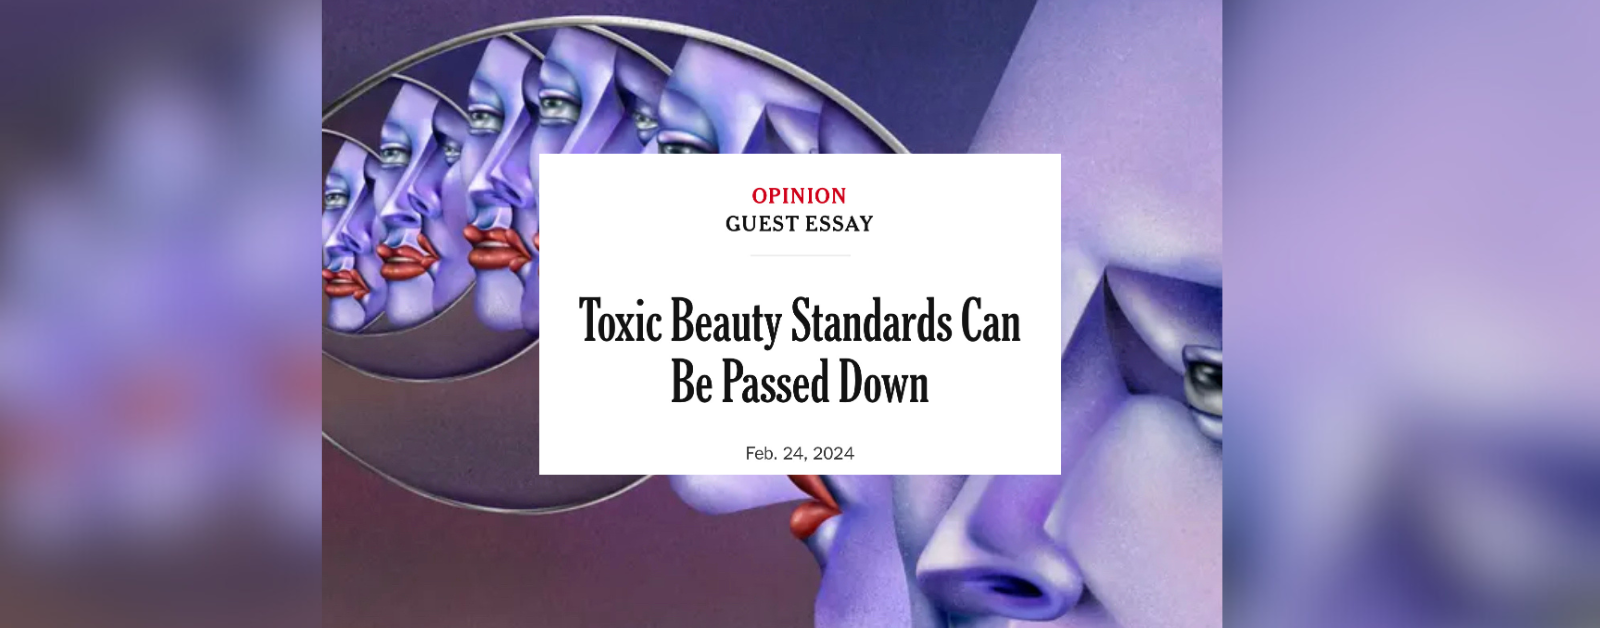 blurred purple background with a screenshot in the middle from the NYT Essay "Toxic Beauty Standards Can Be Passed Down"